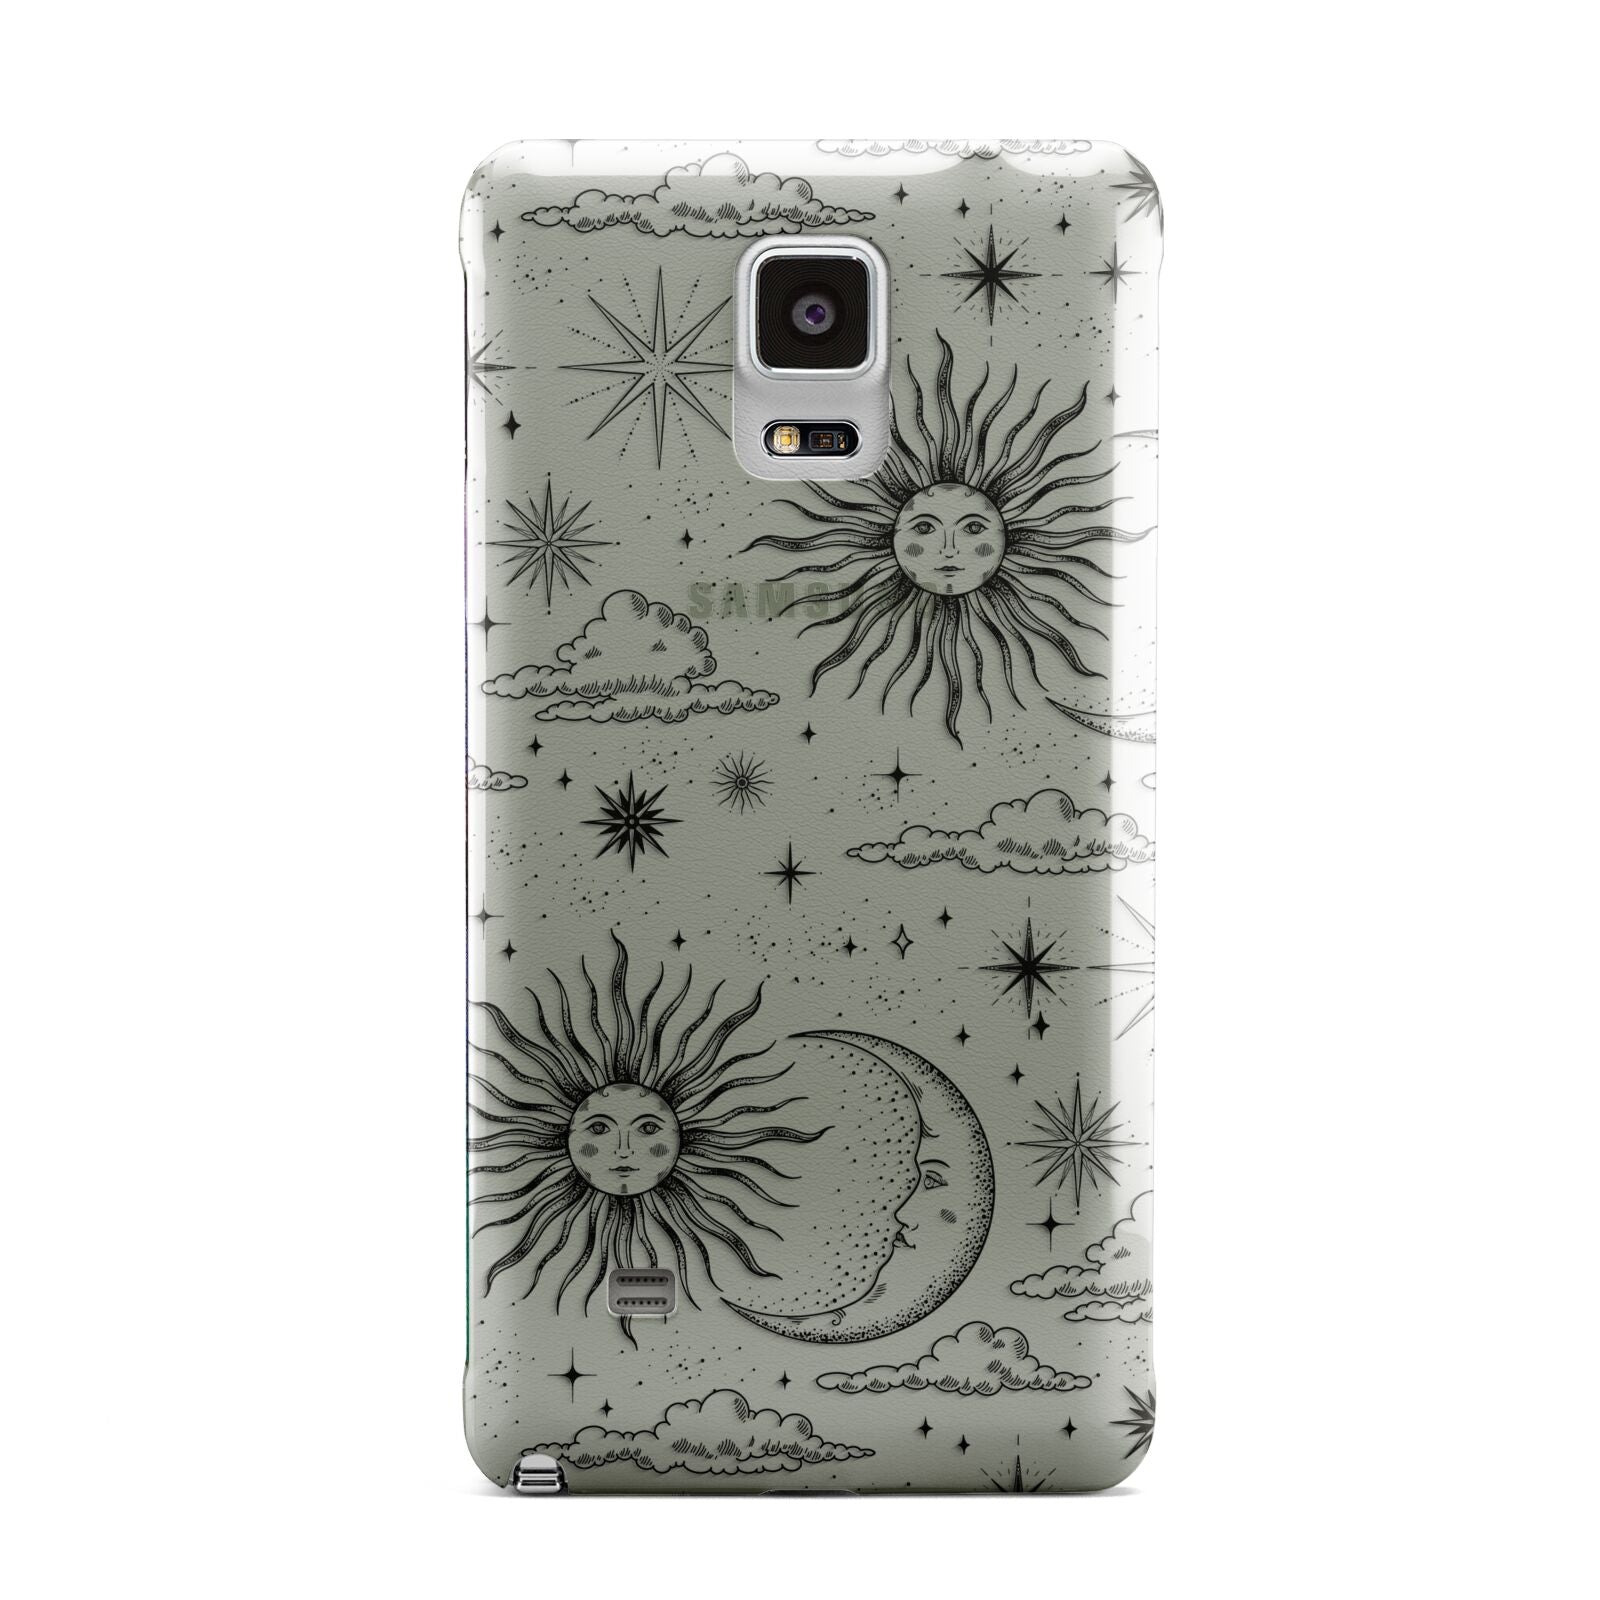 Celestial Suns Clouds Samsung Galaxy Note 4 Case